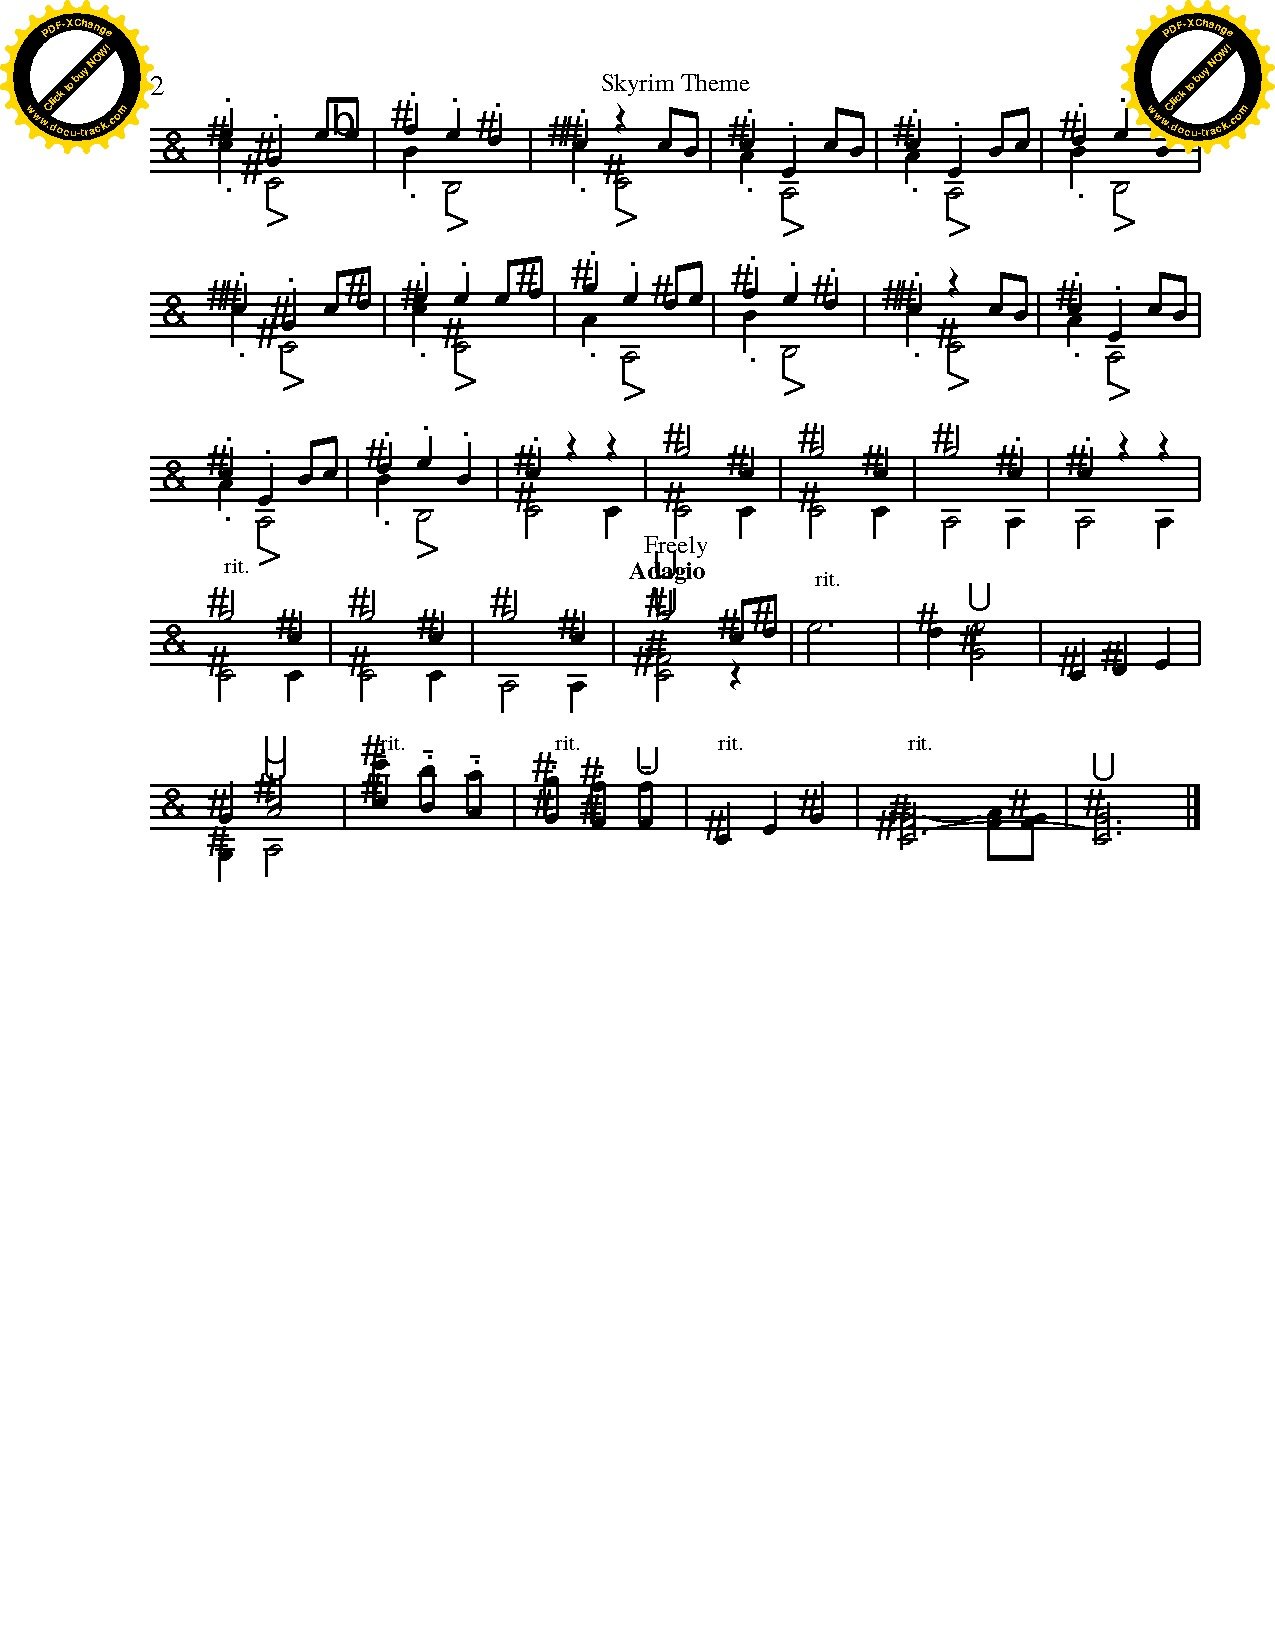 Skyrim theme for trumpet page 2.